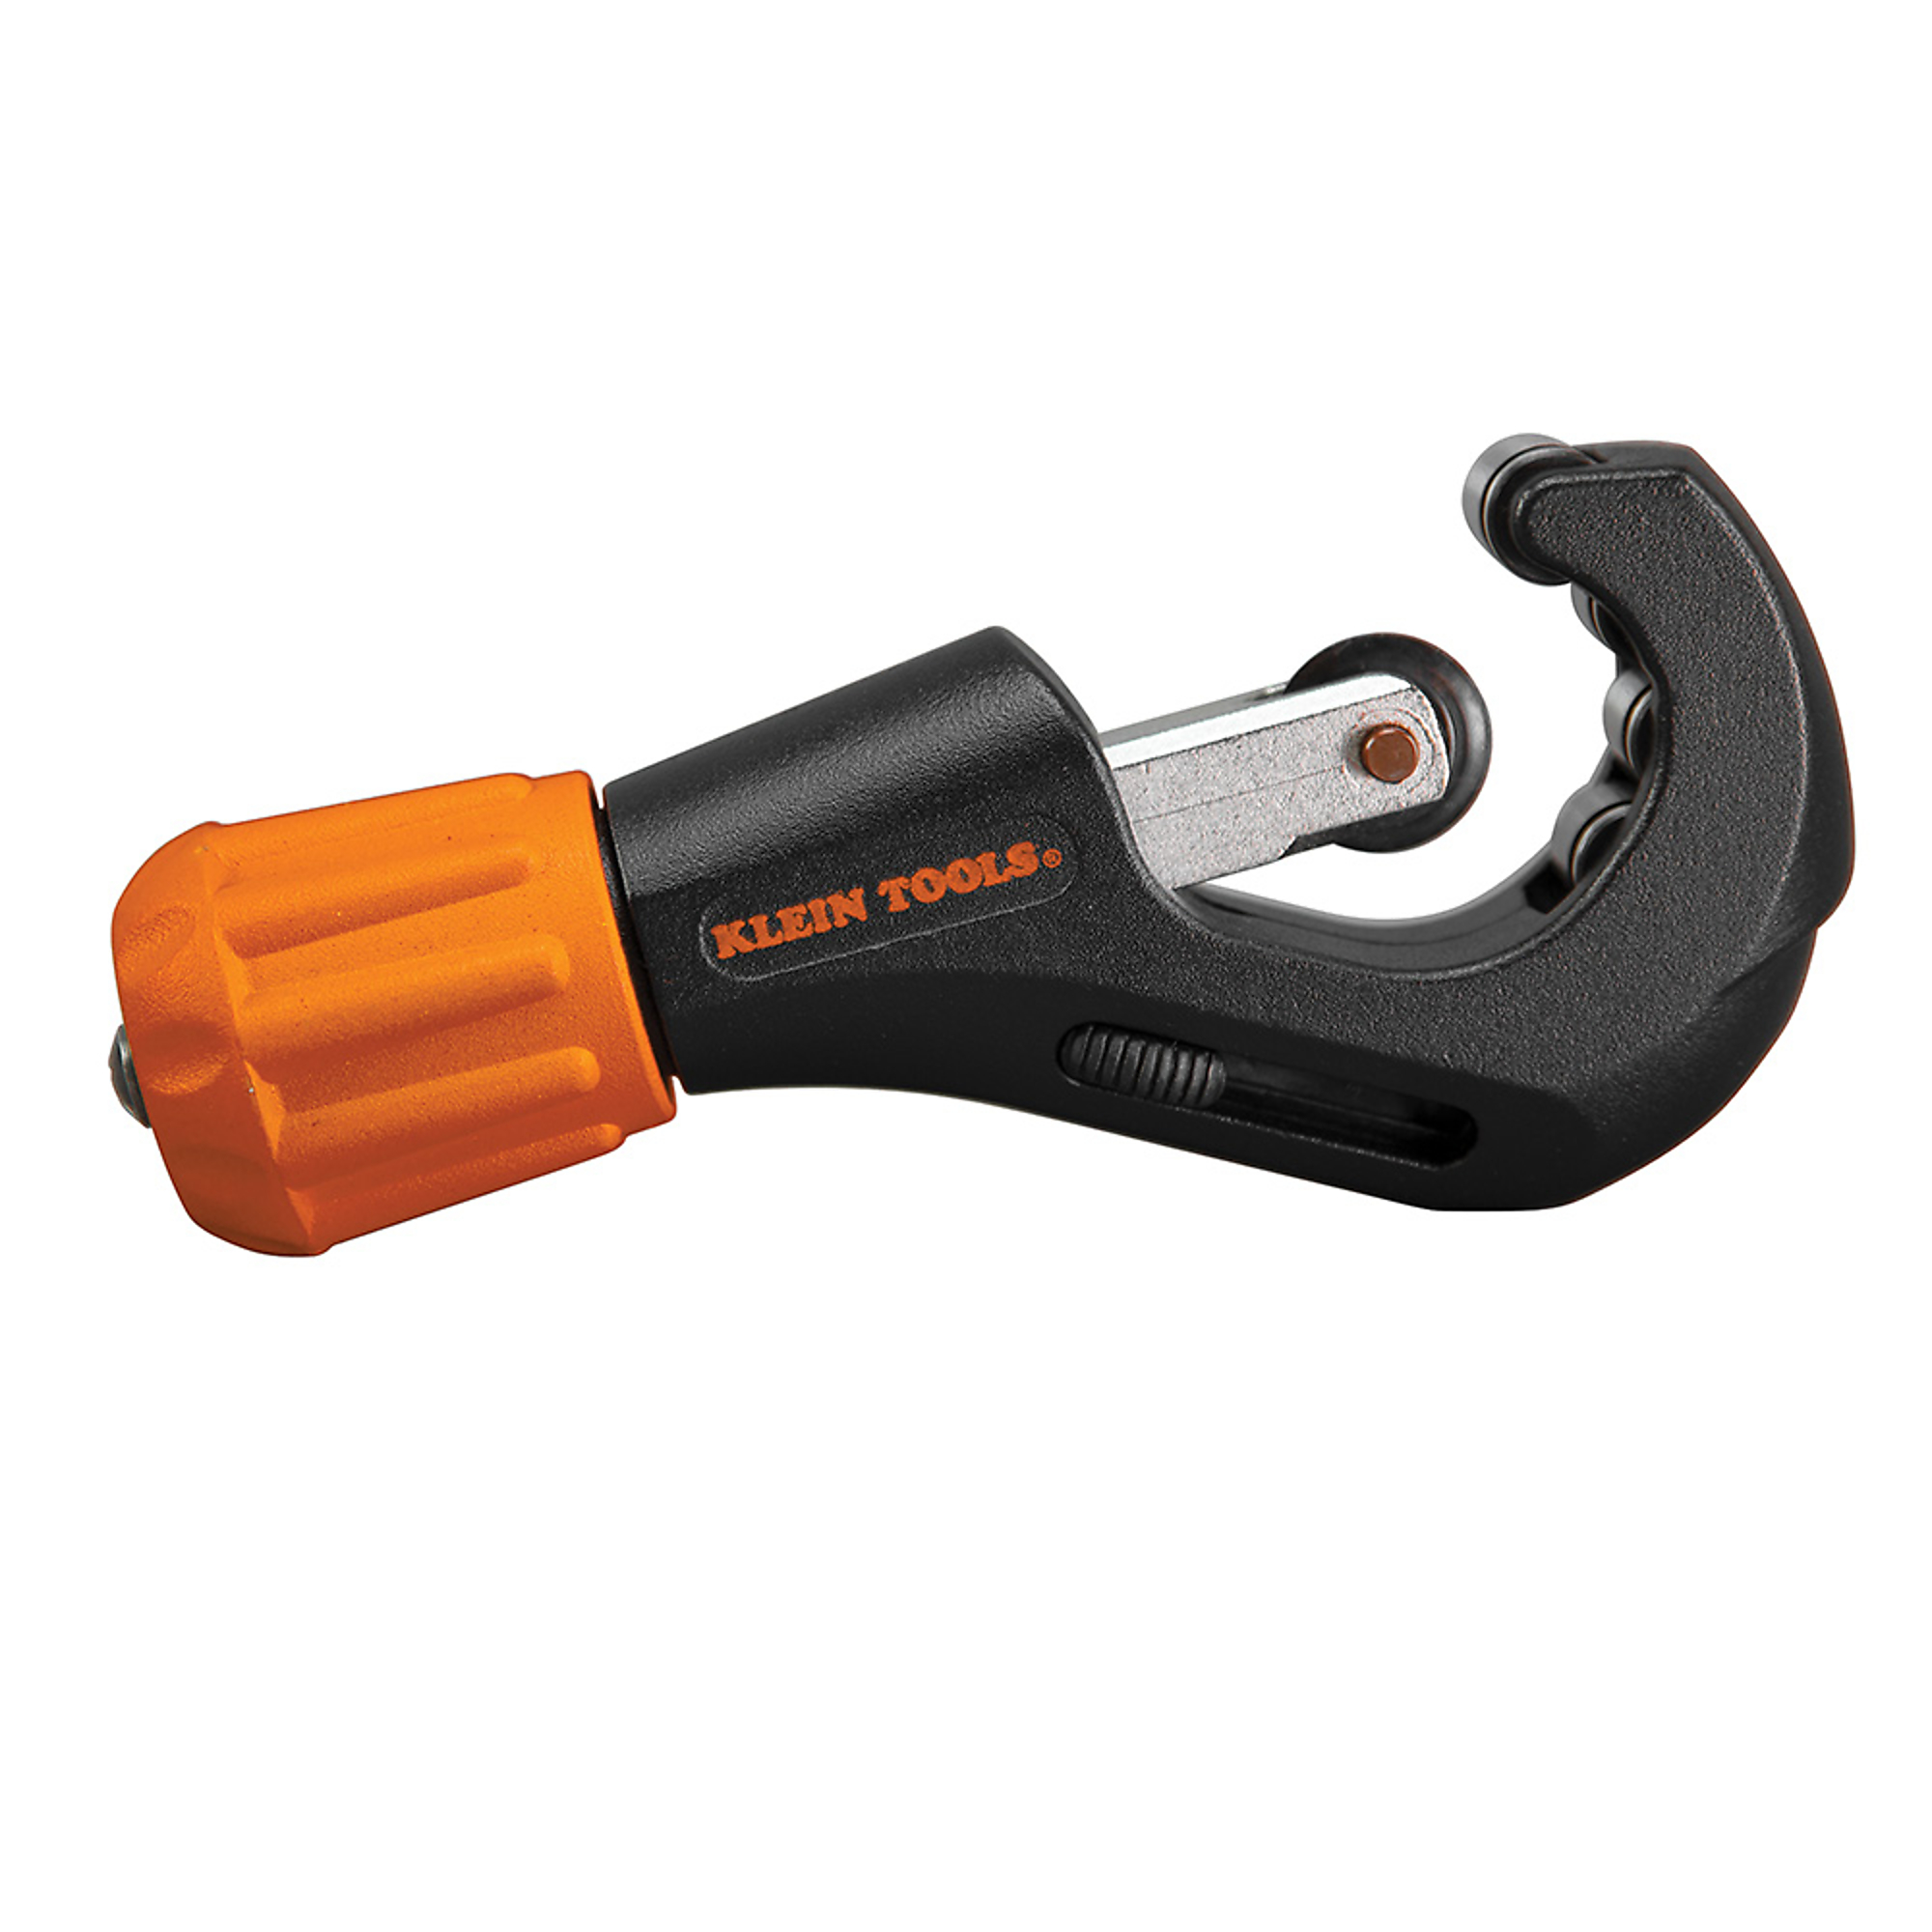 Klein Tools, Professional Tube Cutter, Max. Diameter 1.38 in, Length 6.03 in, Model 88904